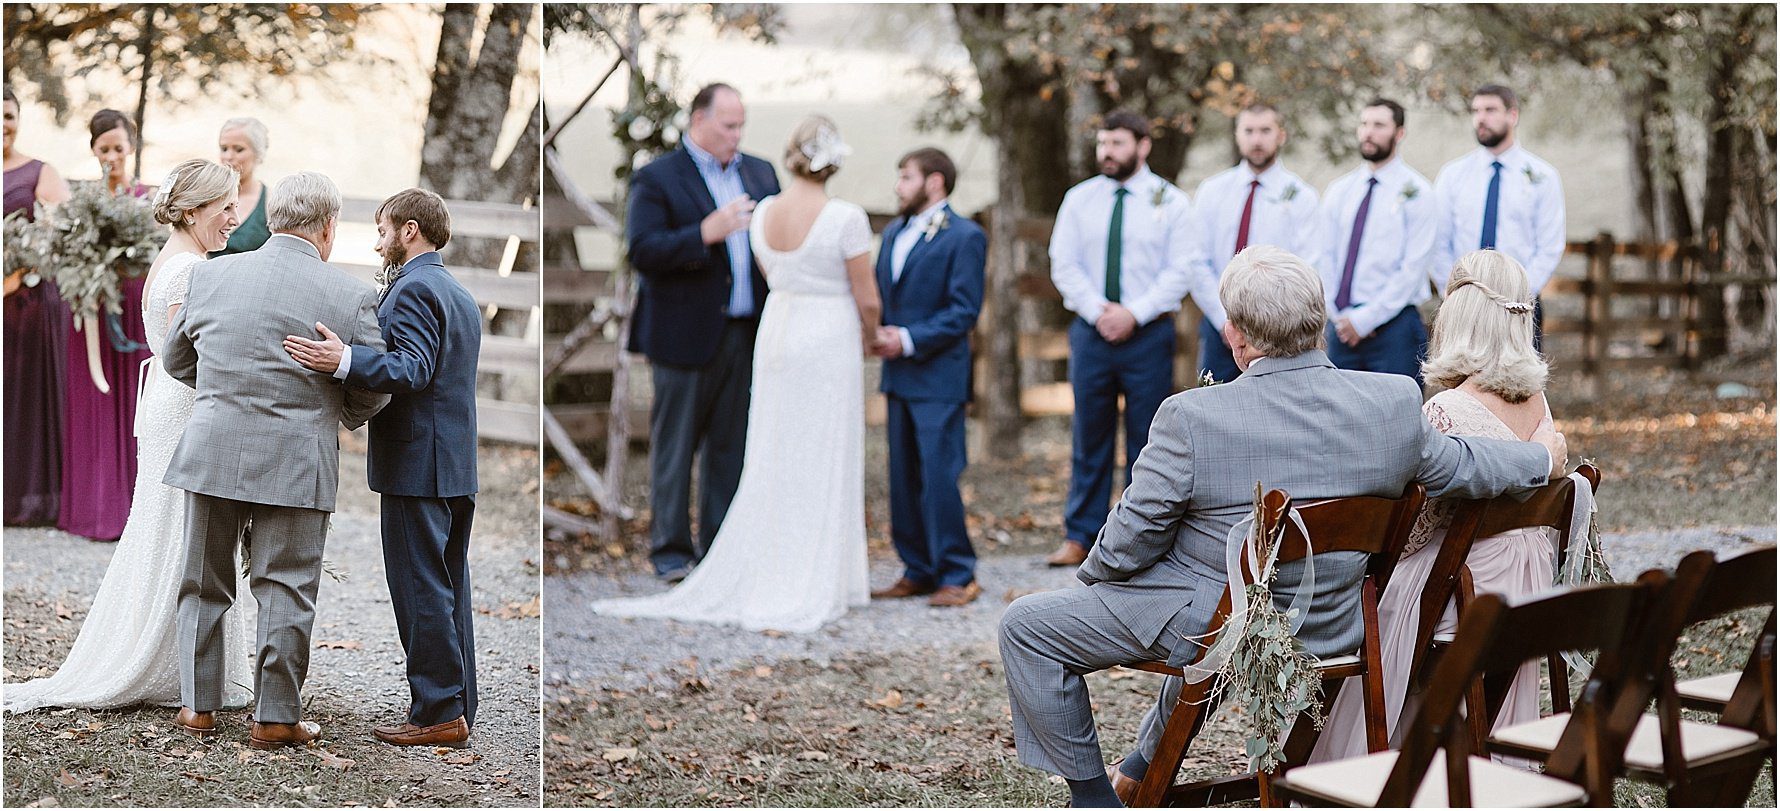 Outdoor Wedding Venues in Knoxville | Erin Morrison Photography www.erinmorrisonphotography.com